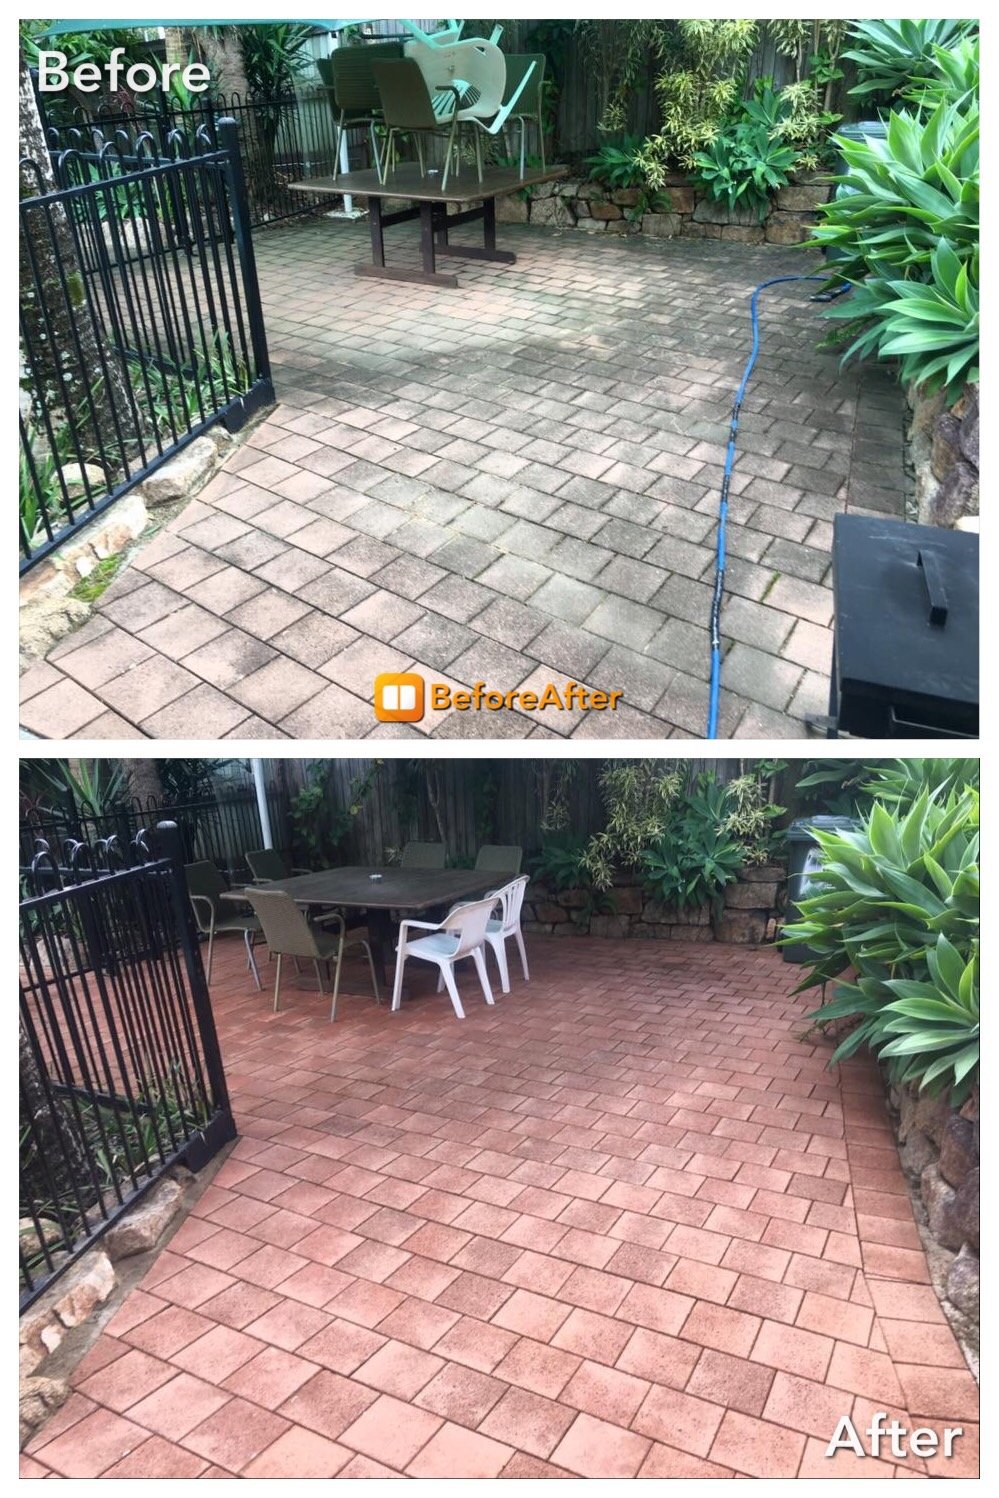 Before and after professionally cleaning a patio area in a Brisbane garden